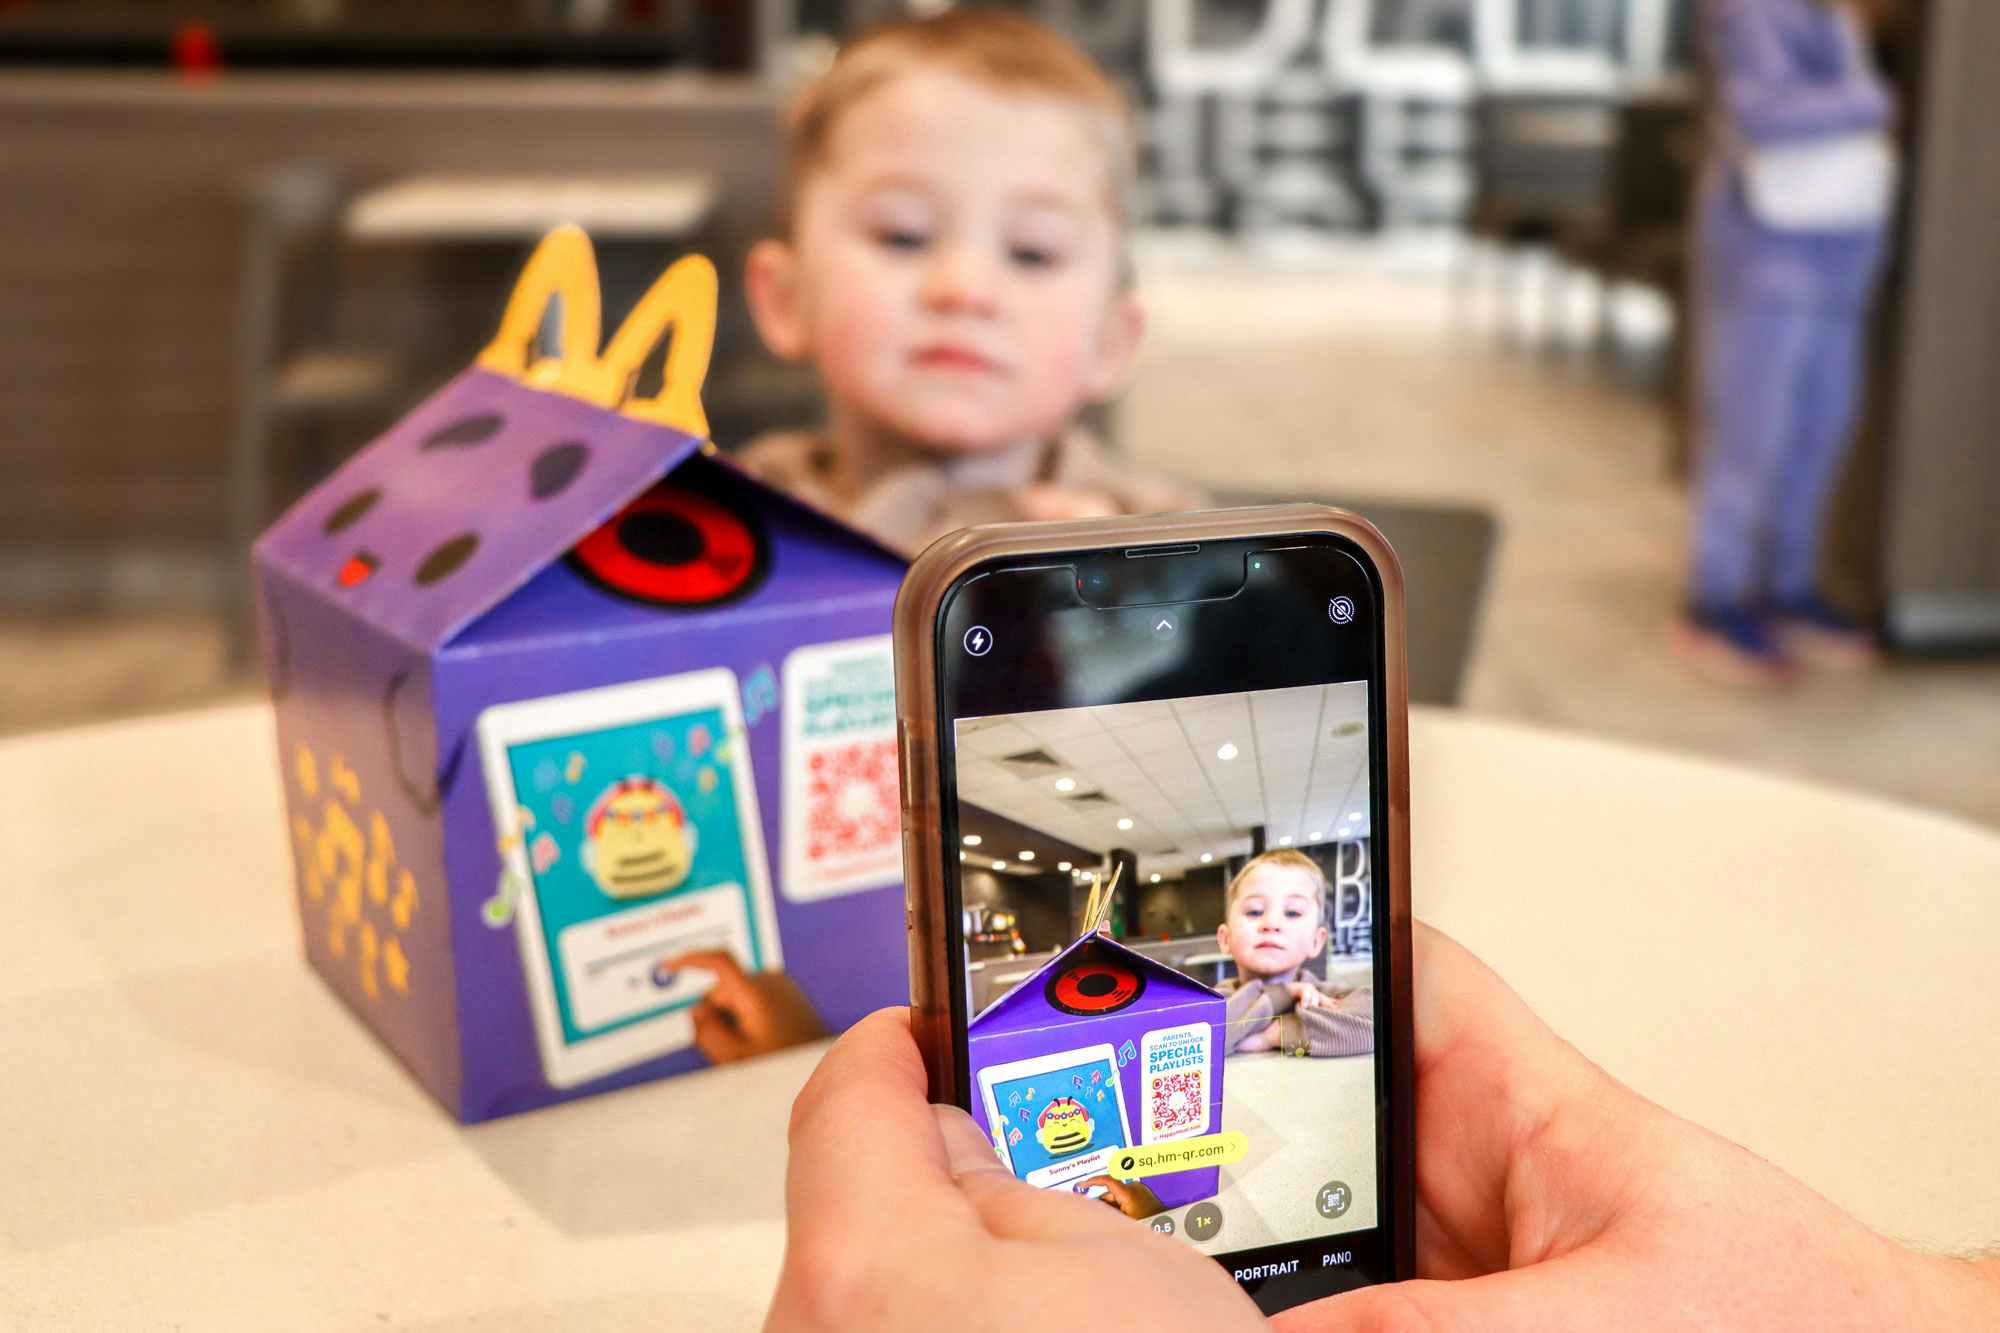 a person scanning a QR code on a happy meal